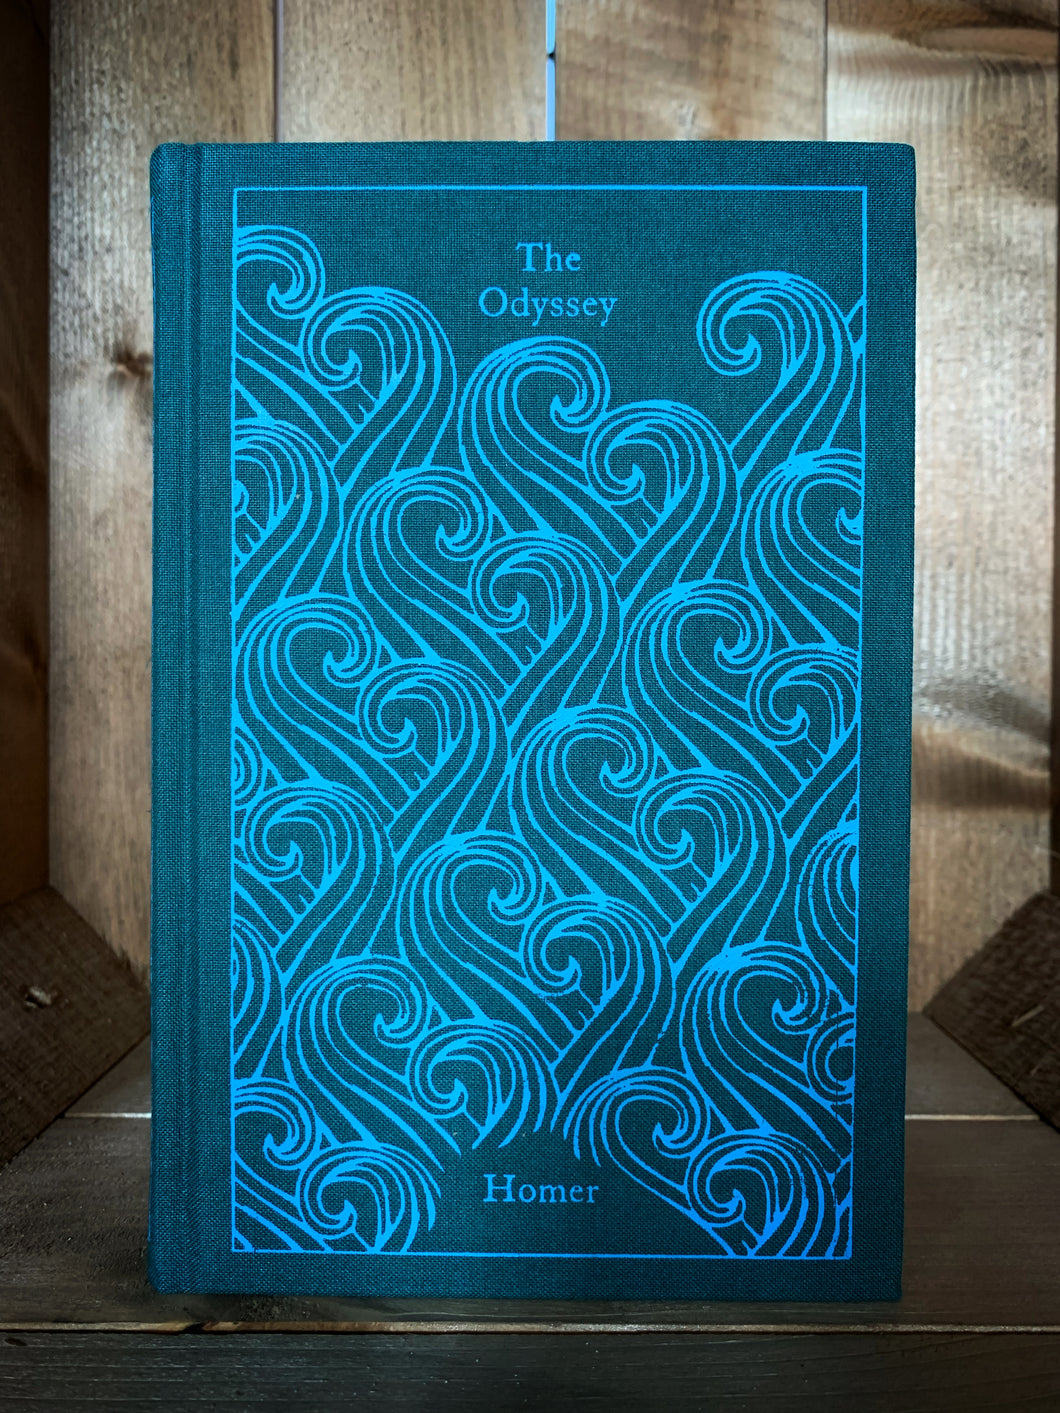 Image of the front cover of the Penguin clothbound classic The Odyssey featuring a teal background and a repeat pattern of printed light blue waves.